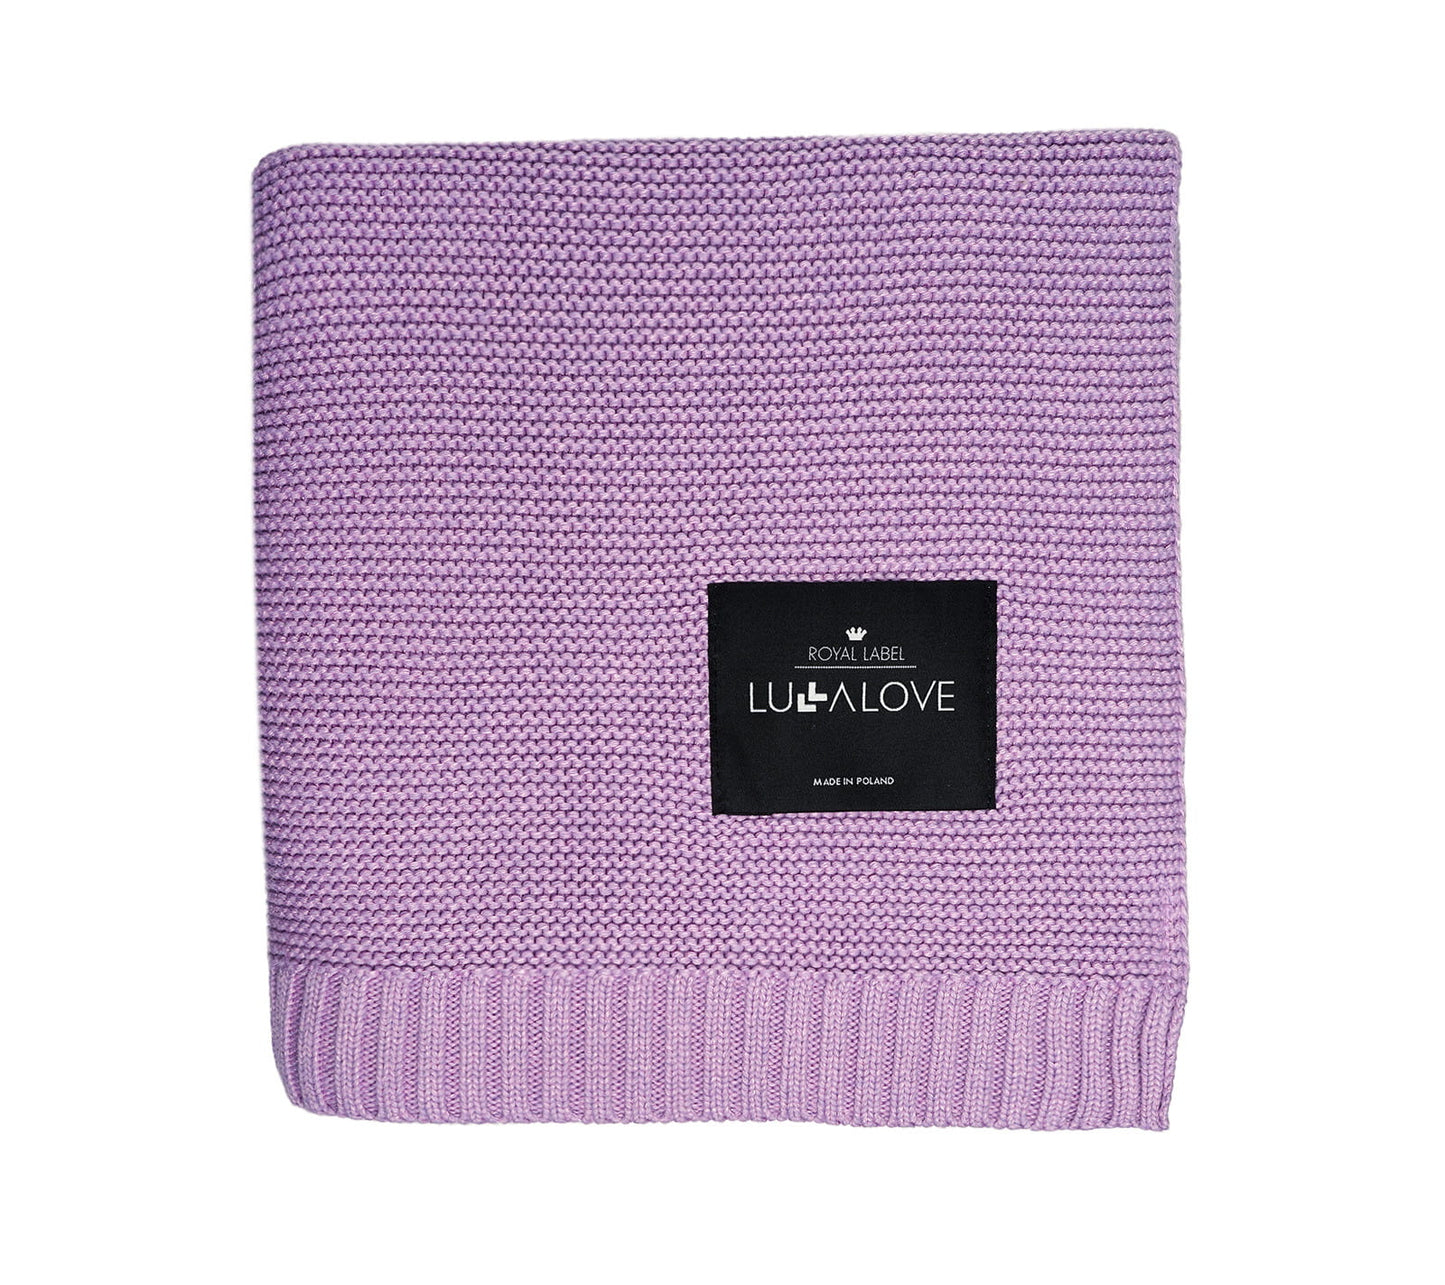 Bamboo baby blanket - Lavender - Classic knit